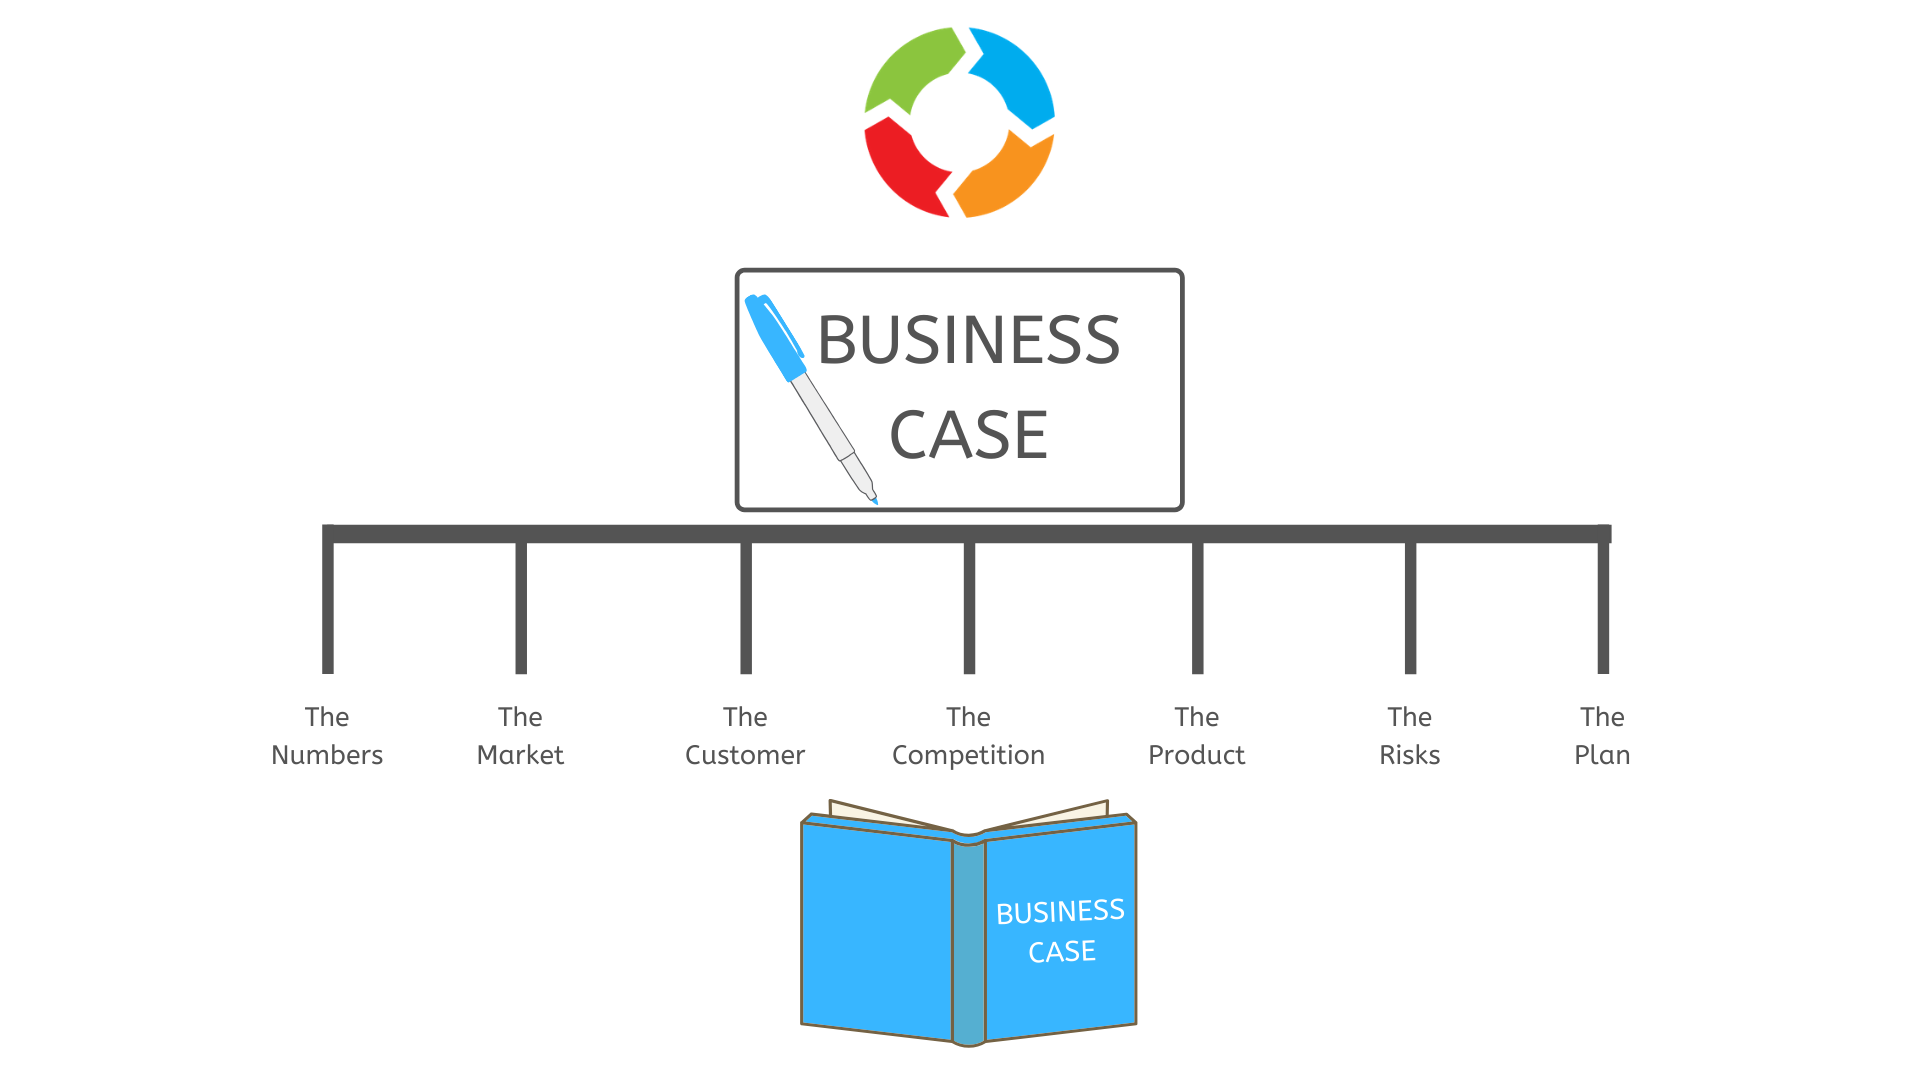 Business case buildiing